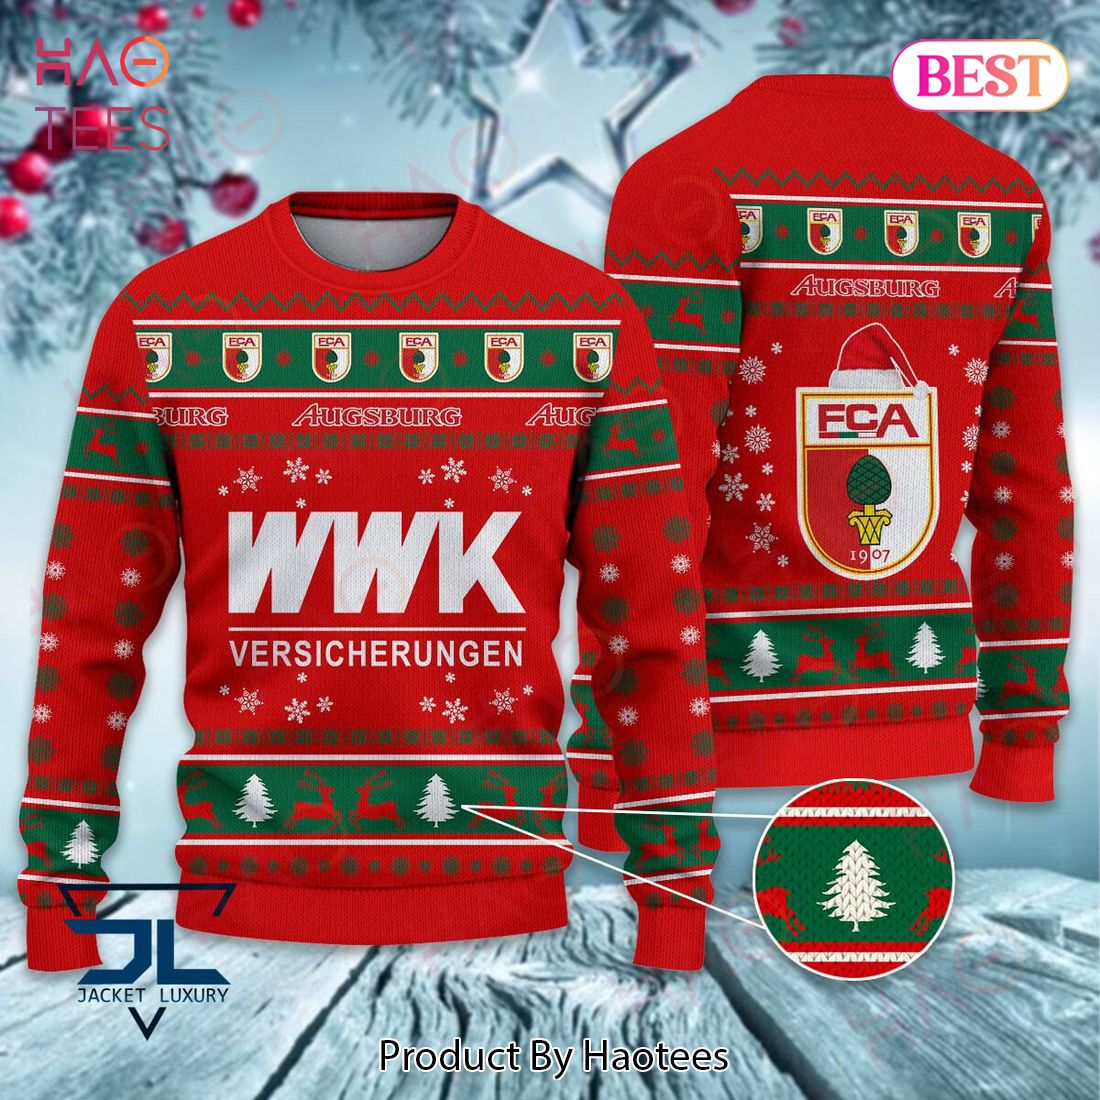 BEST FC Augsburg WWK Christmas Luxury Brand Sweater Limited Edition